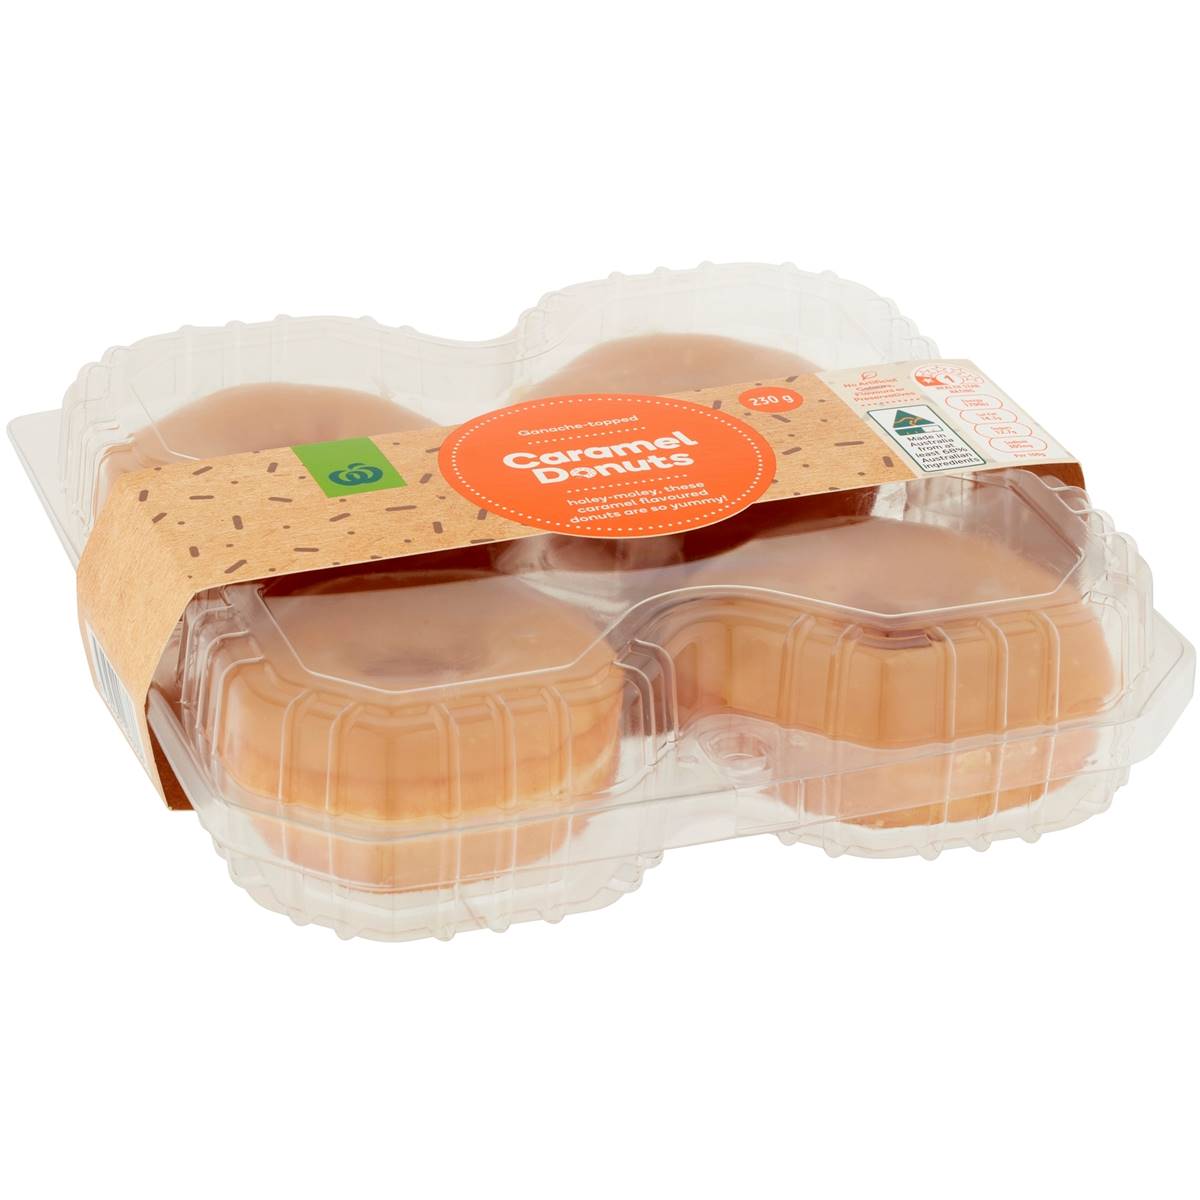 Calories in Woolworths Caramel Iced Donuts